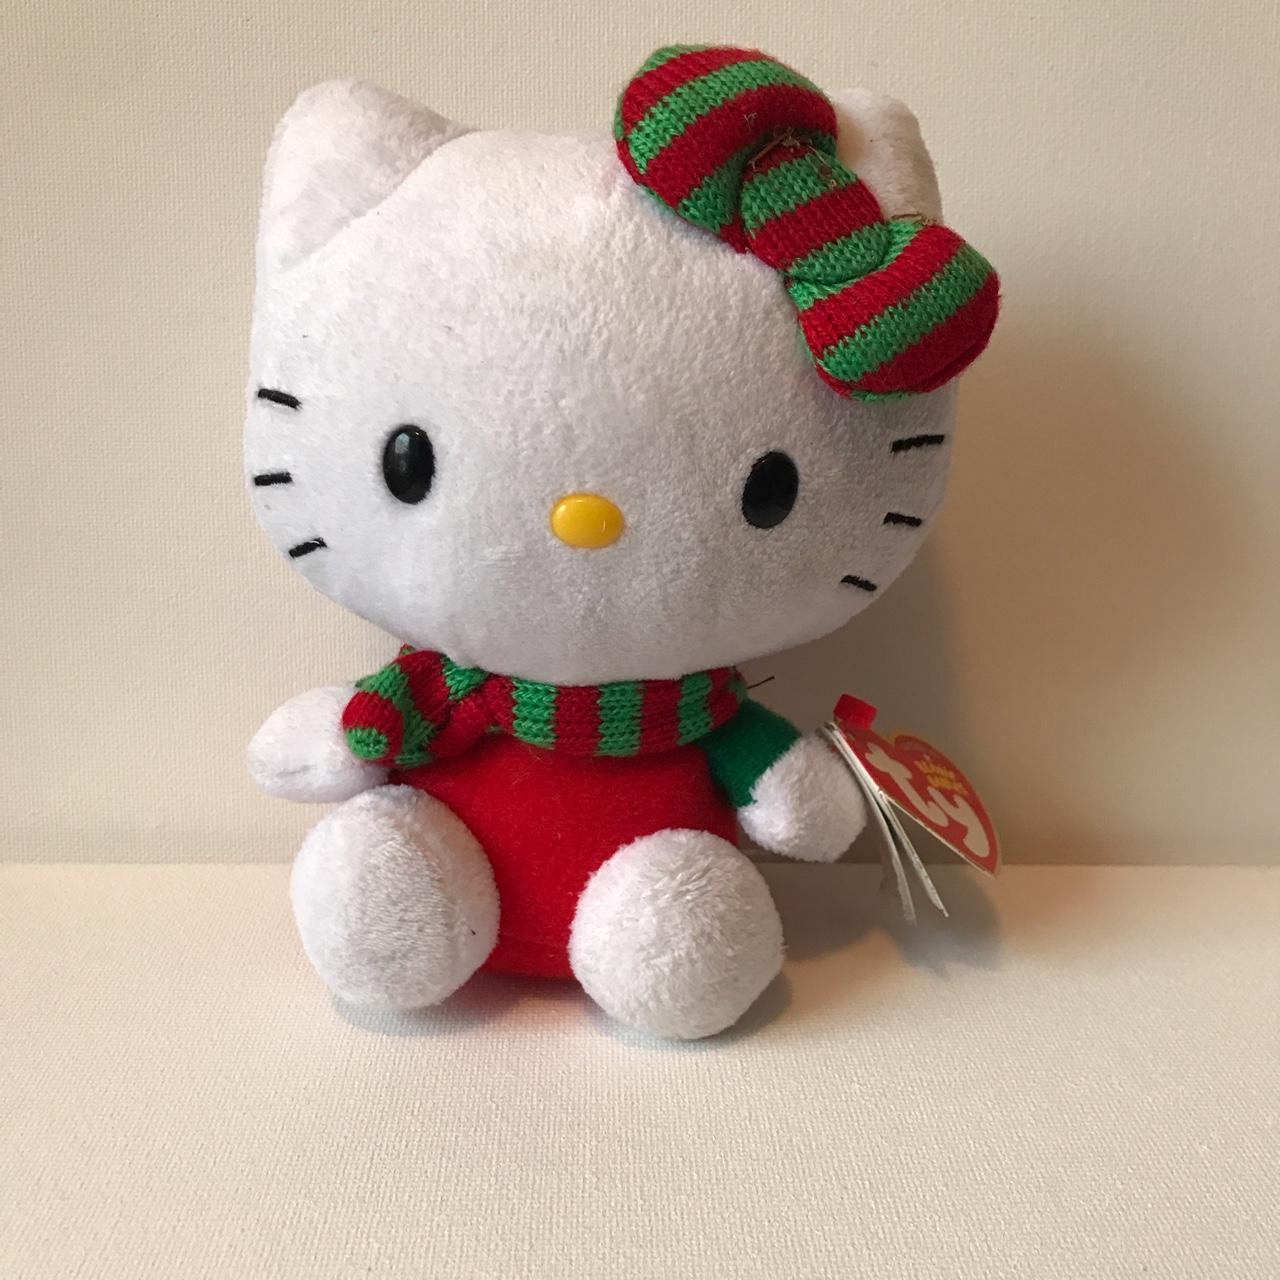 Product Image 1 - Hello kitty plush
Pm with any